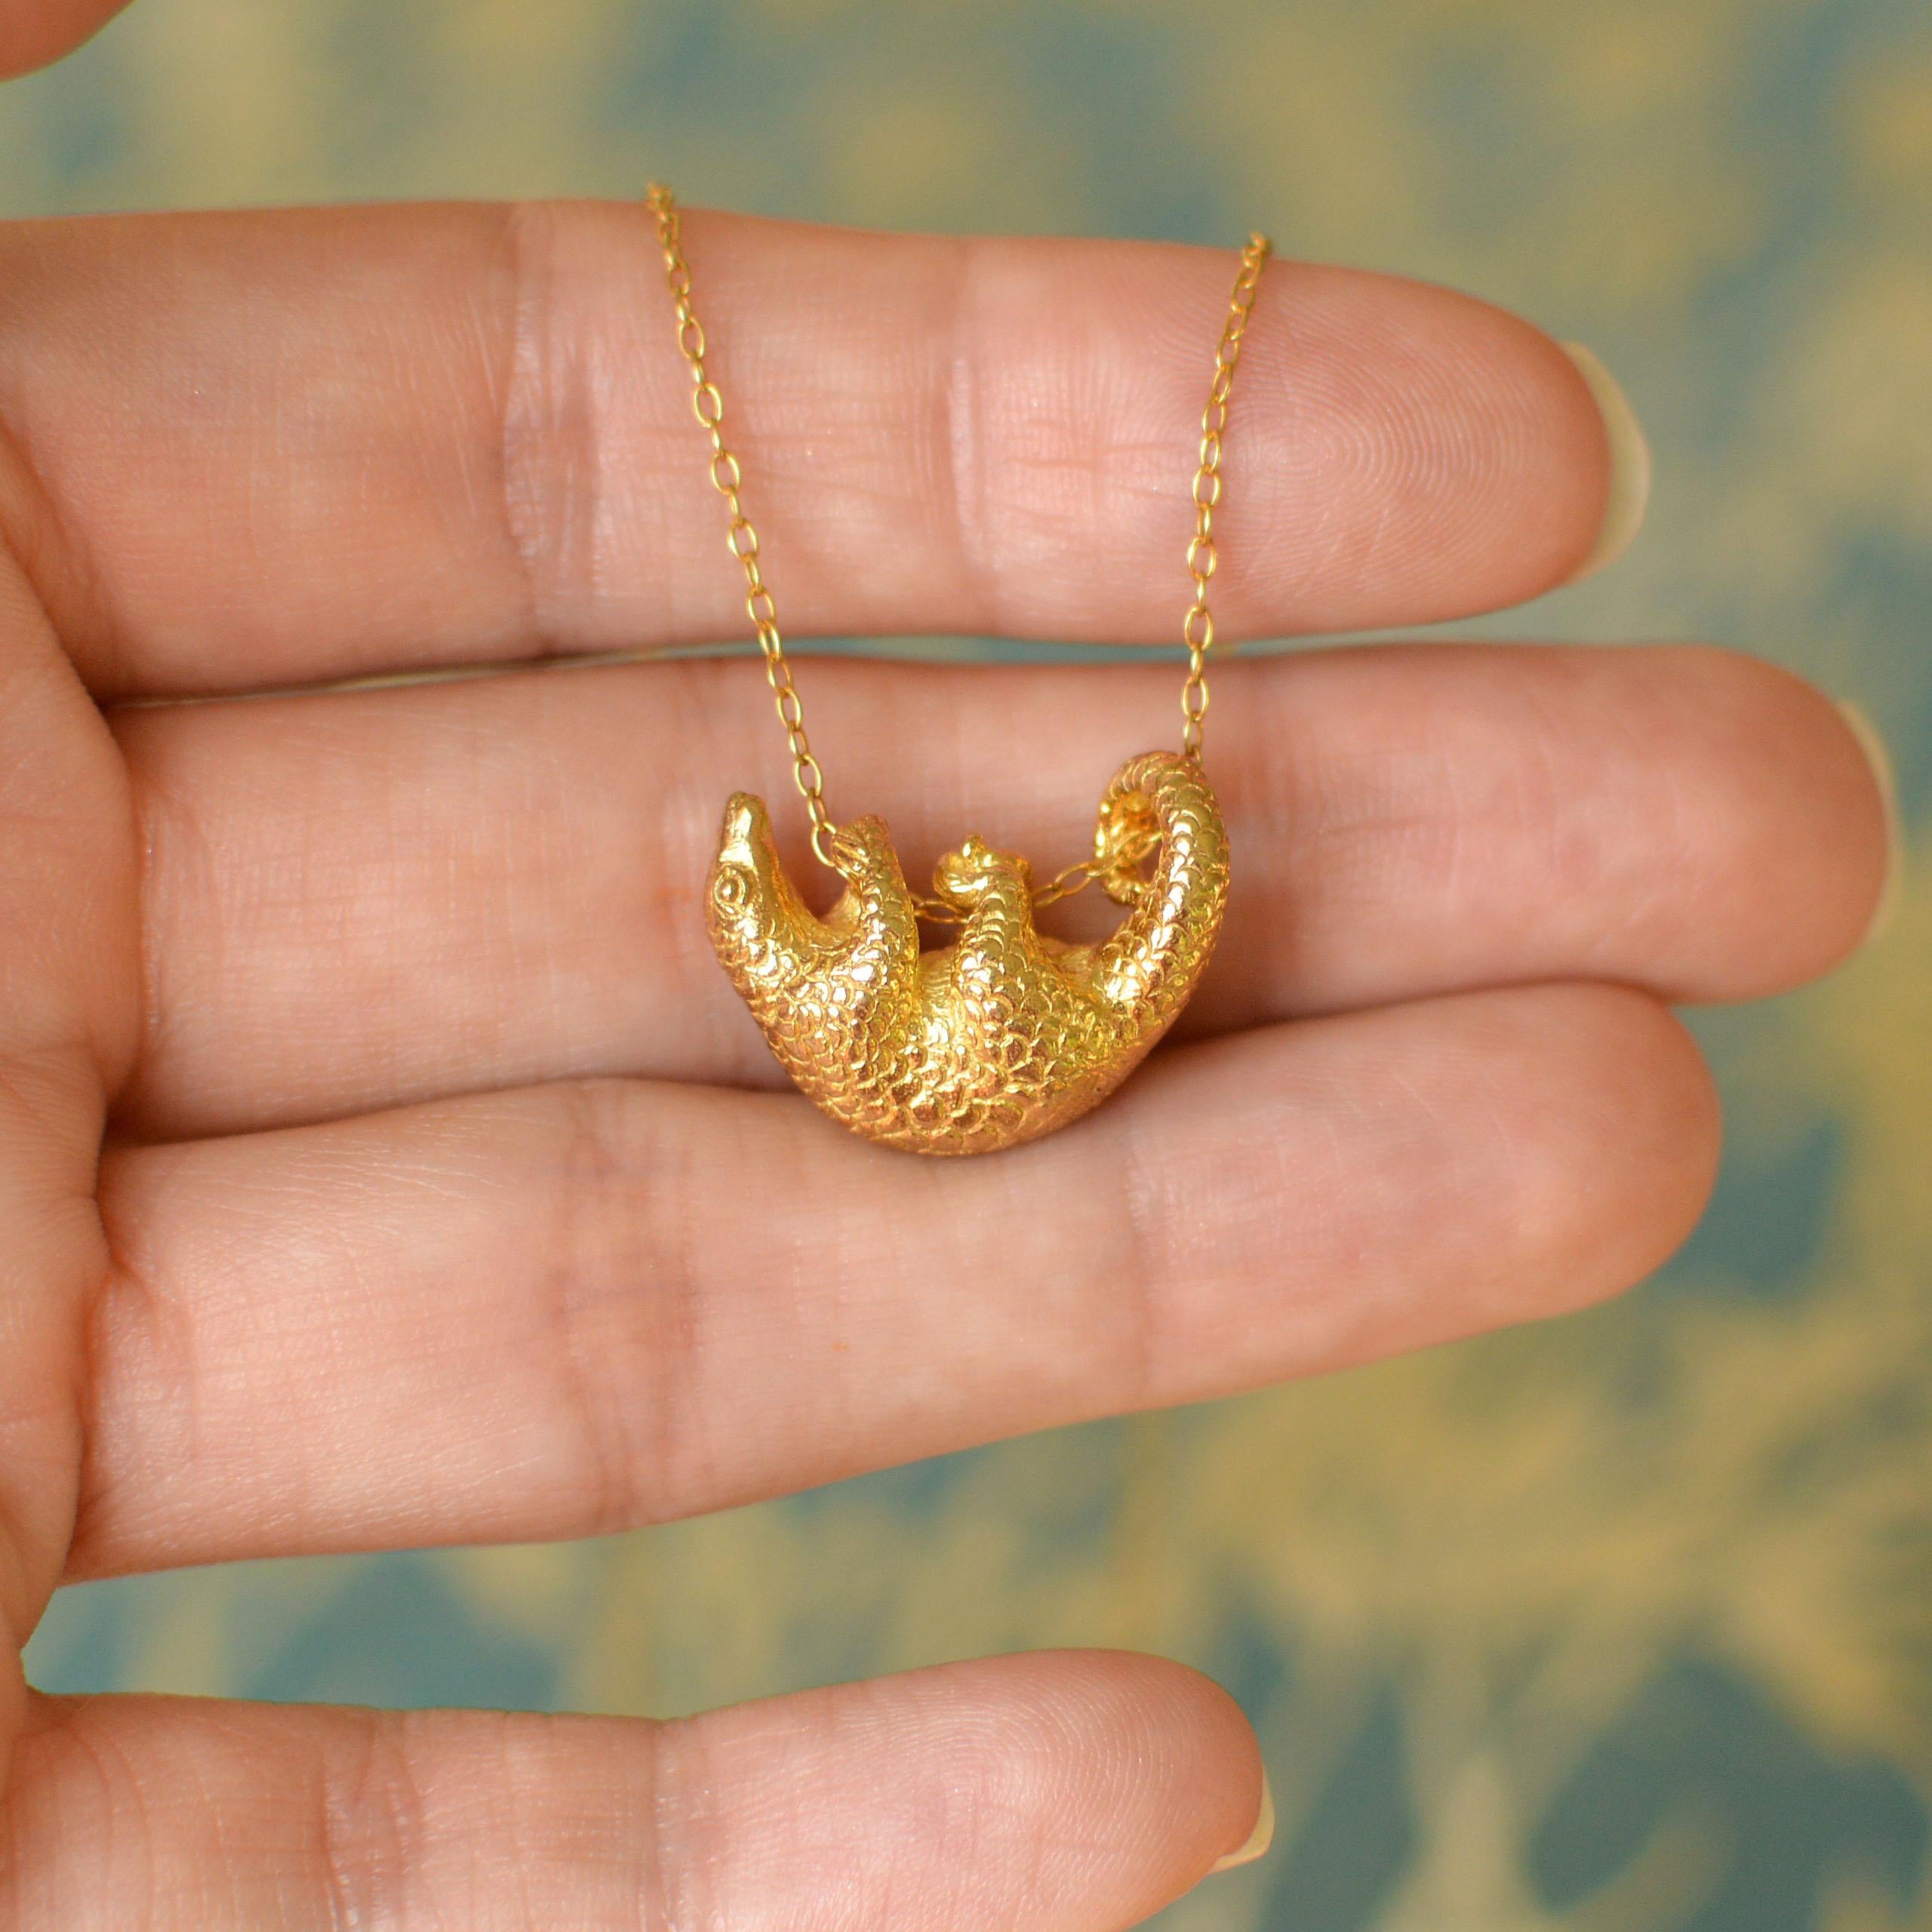 pangolin gifts necklace